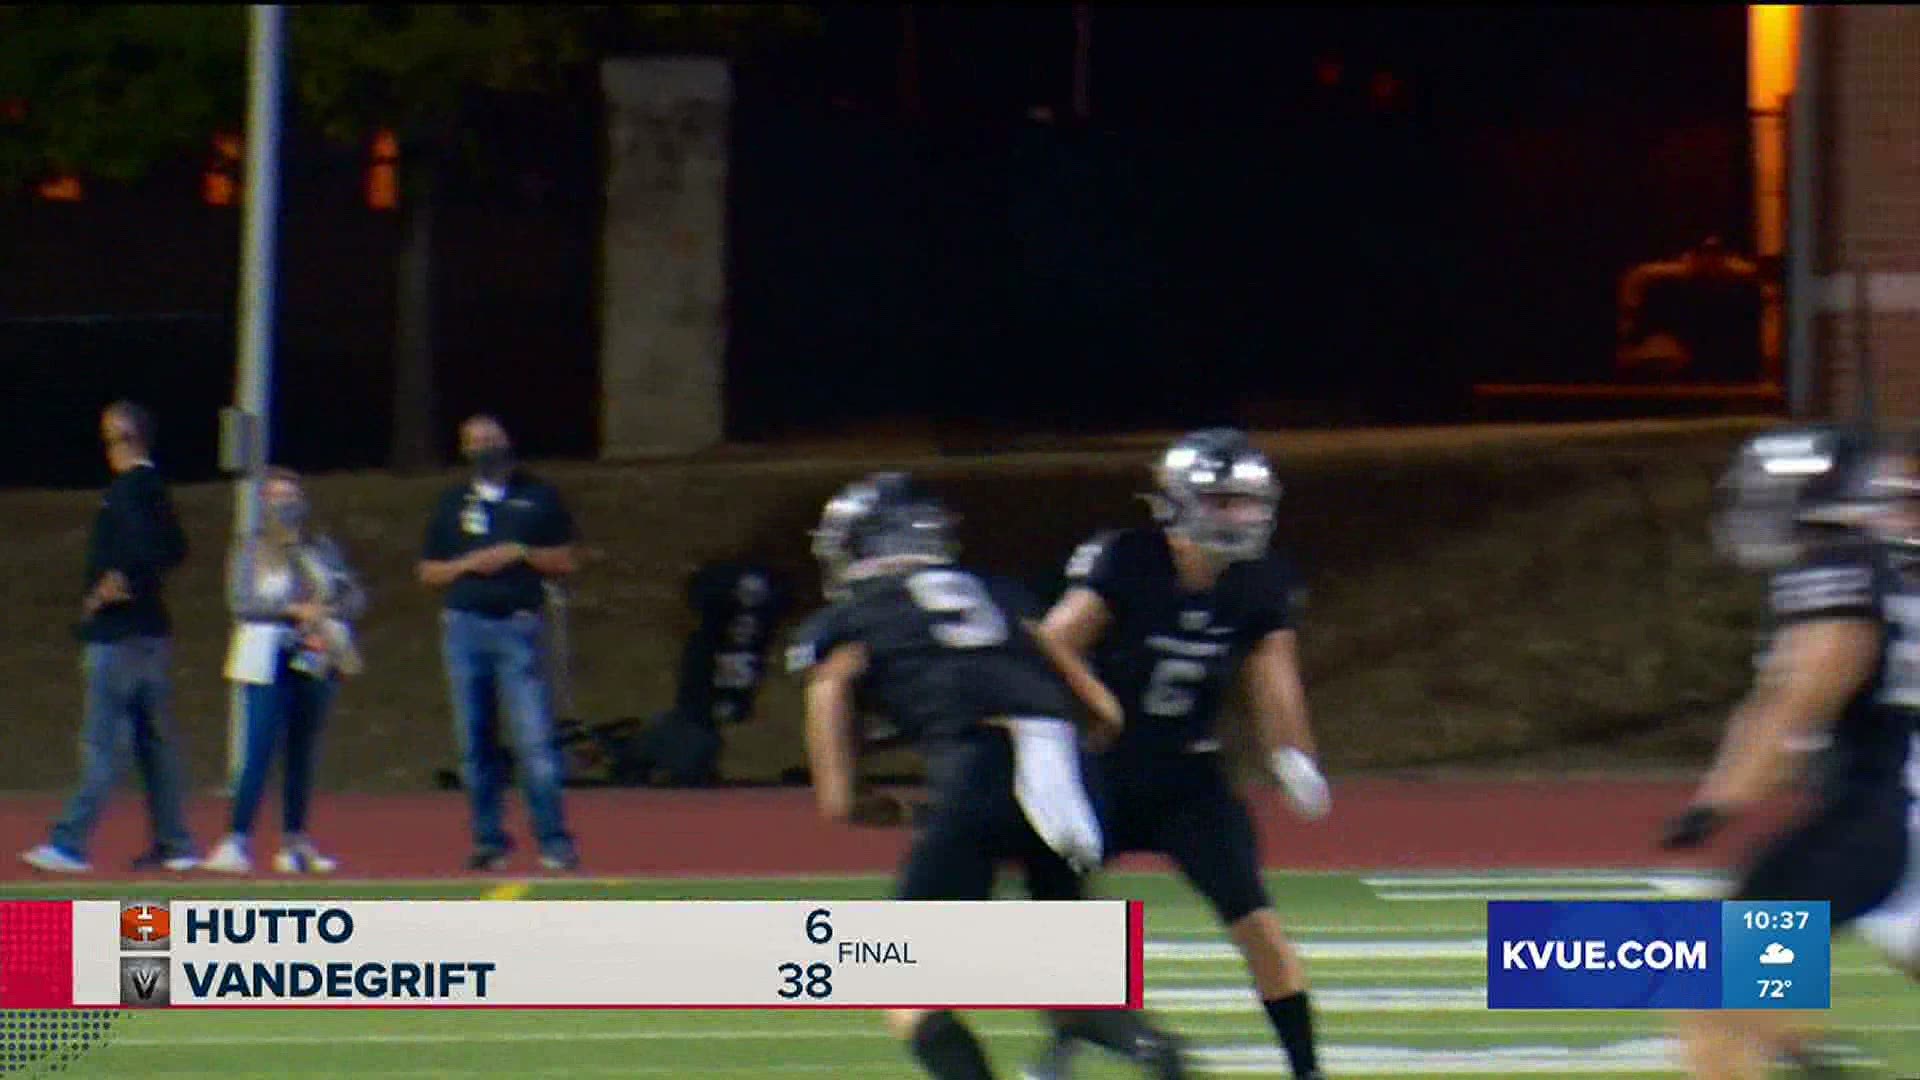 The Hutto Hippos and Vandegrift Vipers matchup is KVUE's Game of the Week!